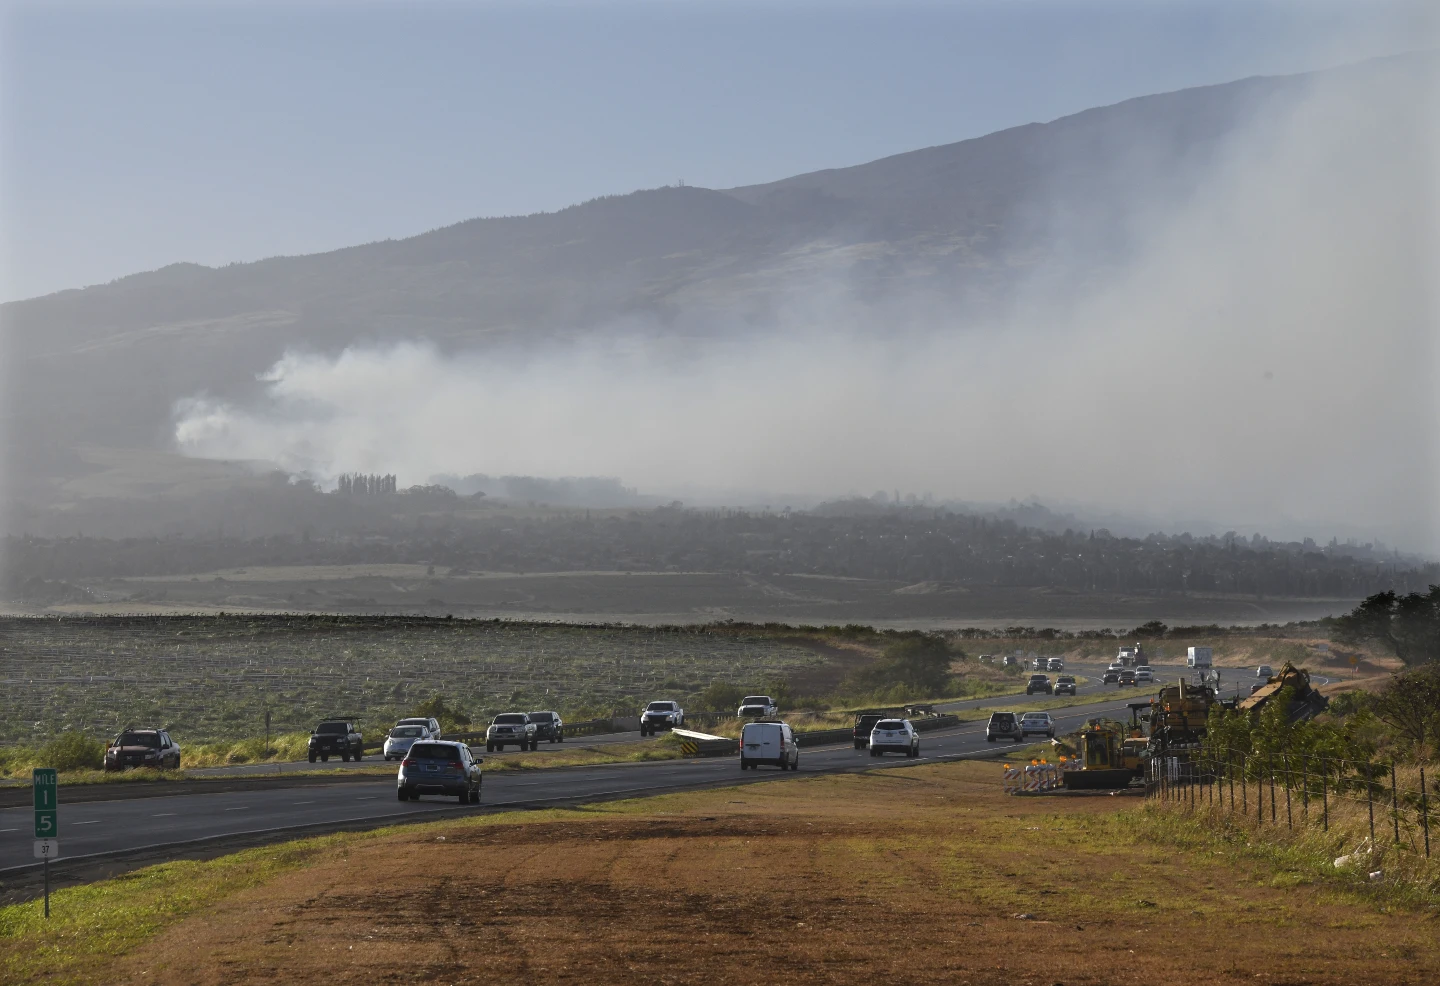 Smoke blows across the slope of Haleakala volcano on Maui, Hawaii, as a fire burns in Maui’s upcountry region on Tuesday, 8 August 2023. Several Hawaii communities were forced to evacuate from wildfires that destroyed at least two homes as of Tuesday as a dry season mixed with strong wind gusts made for dangerous fire conditions. Photo: Matthew Thayer / The Maui News / AP